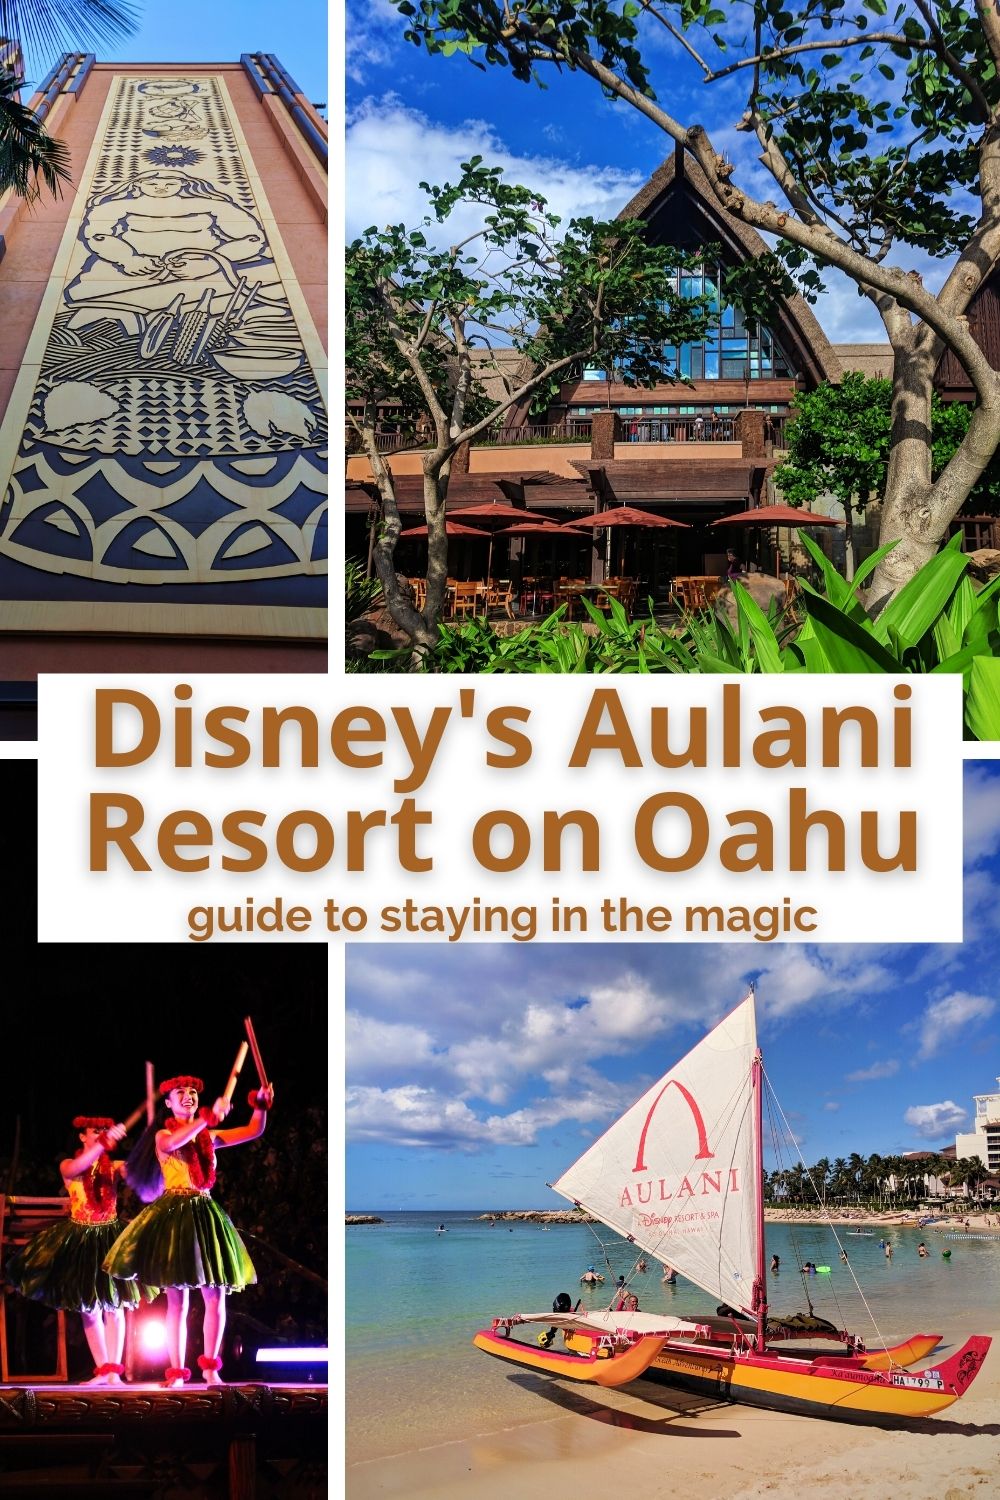 Review of Disney's Aulani Resort on the island of Oahu, Hawaii. From accommodations to resort amenities and things to do near Aualni, this guide is all you need for planning a trip to Disney's Hawaiian resort.